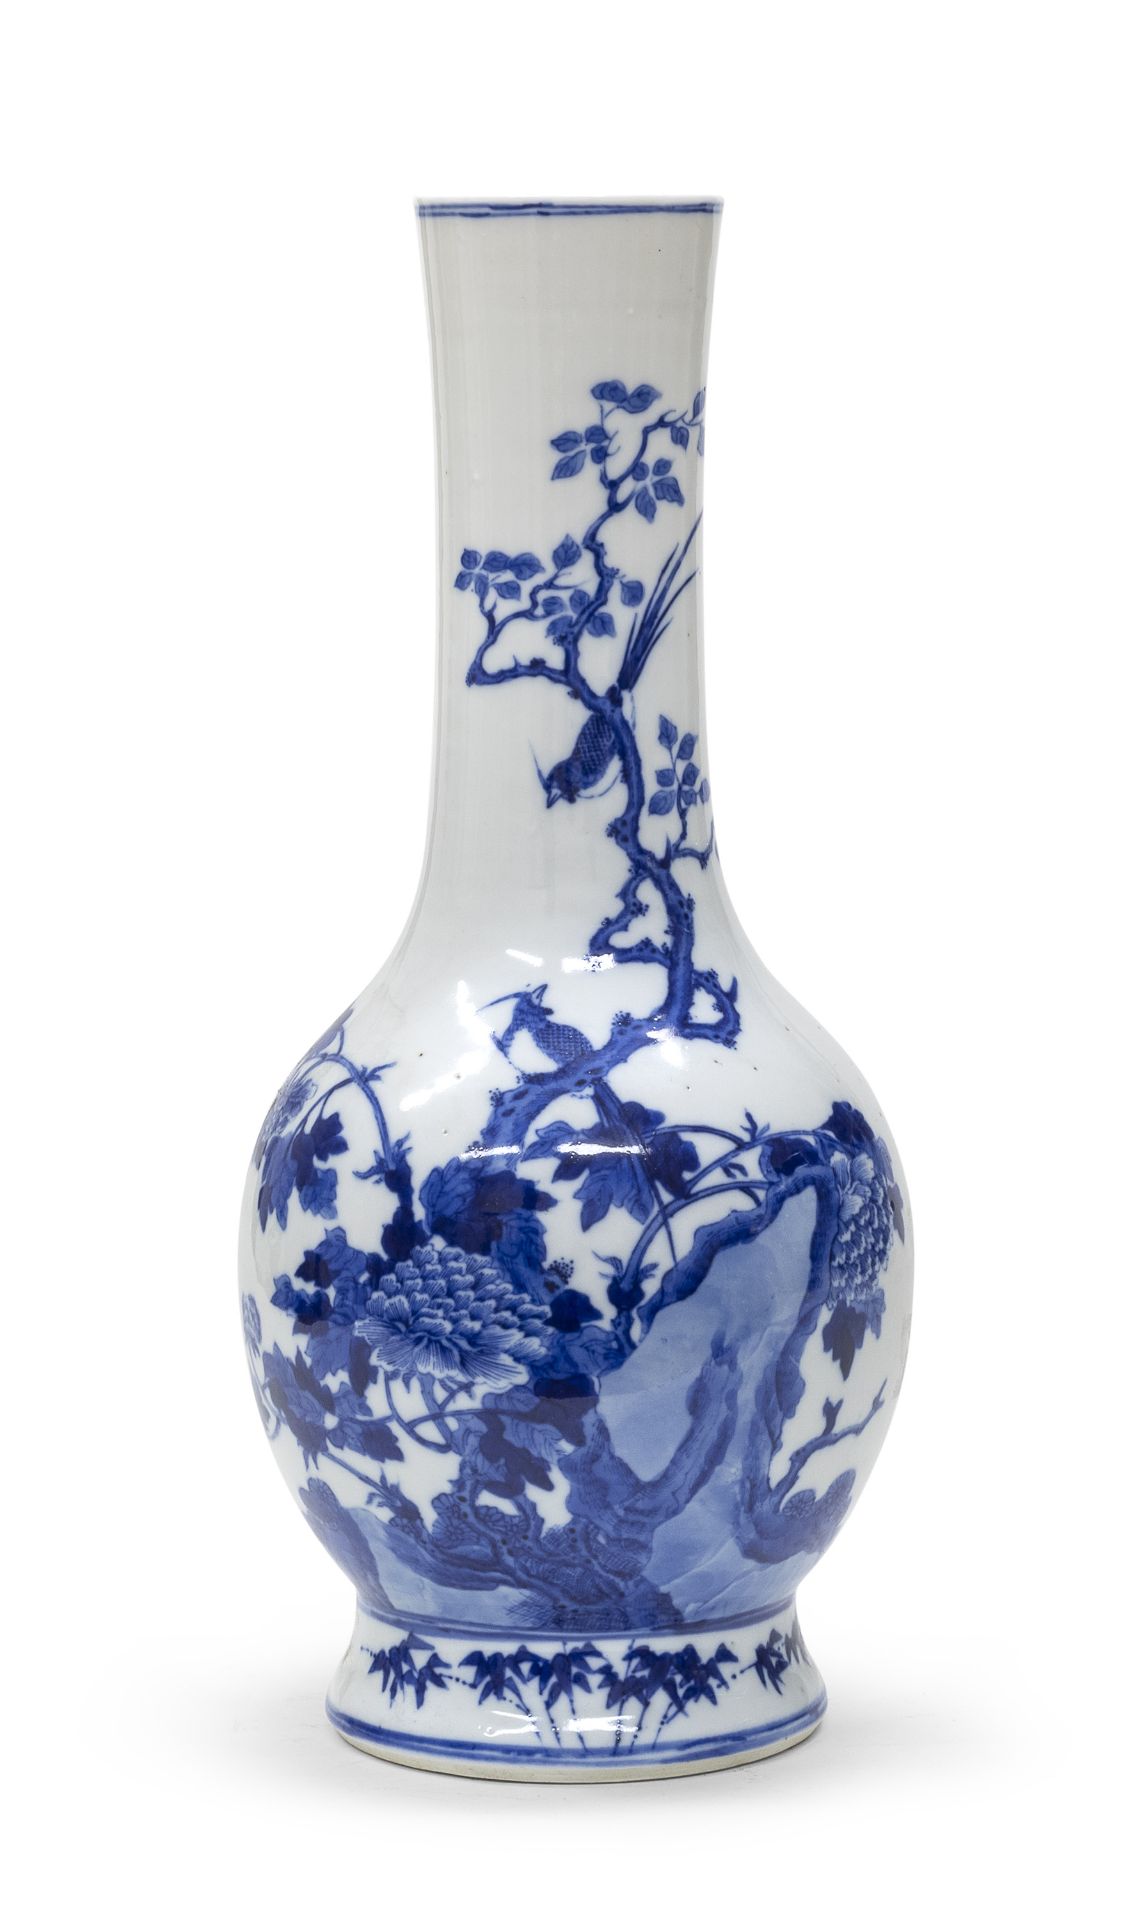 A CHINESE WHITE AND BLUE PORCELAIN VASE. 20TH CENTURY.